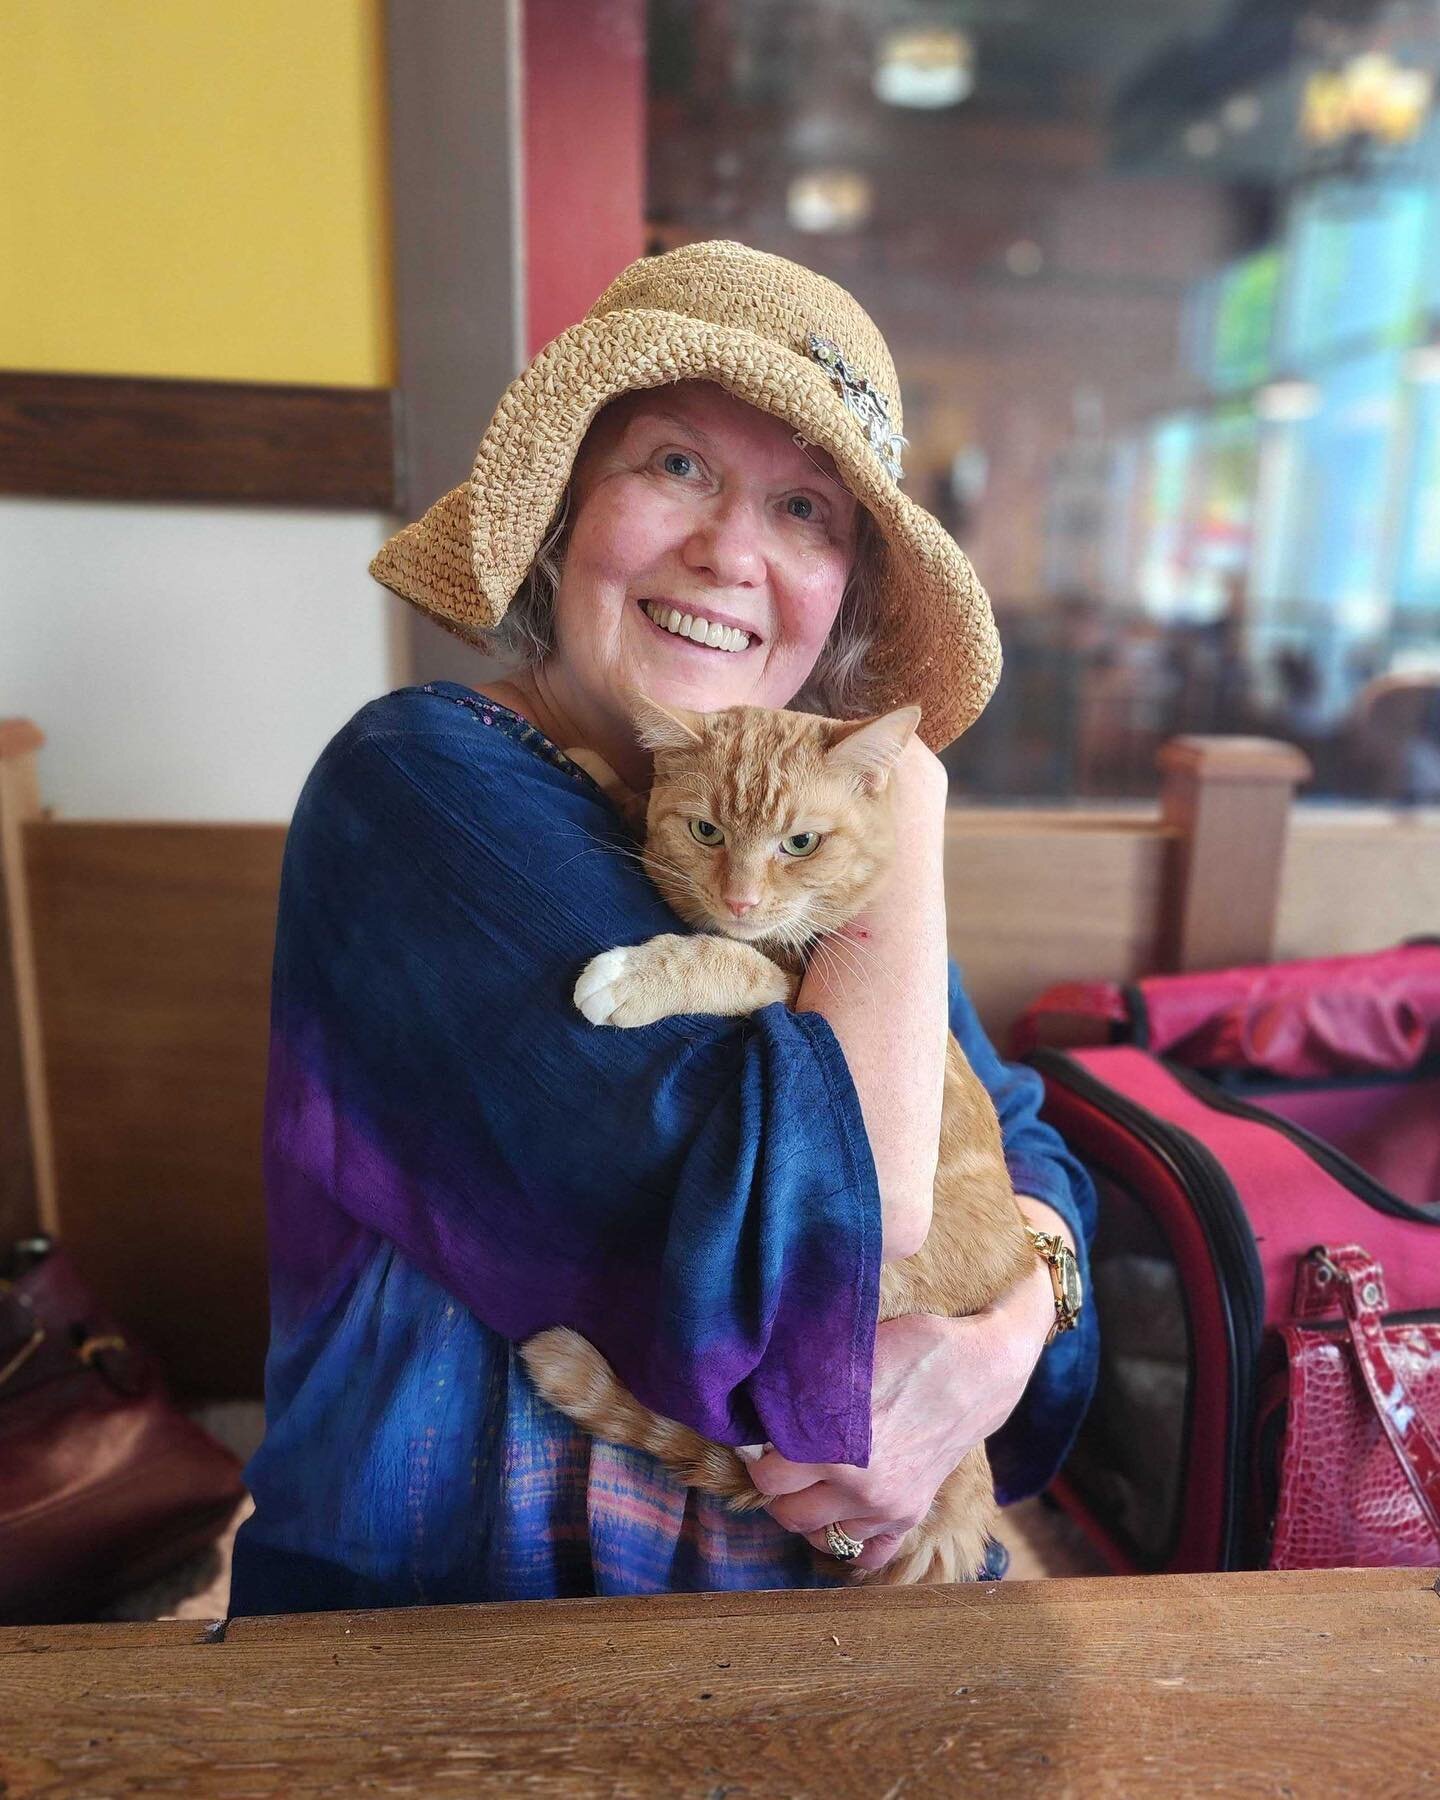 How ADORABLE is this?!? 🐈 Smalls and his new momma! Smalls had unforgettable facial expressions and was a sweetheart who seemed to have found his perfect match. We love you Smalls! 😻 #adopted #adoptdontshop #rescuecat #seattlemeowtropolitan #adopti